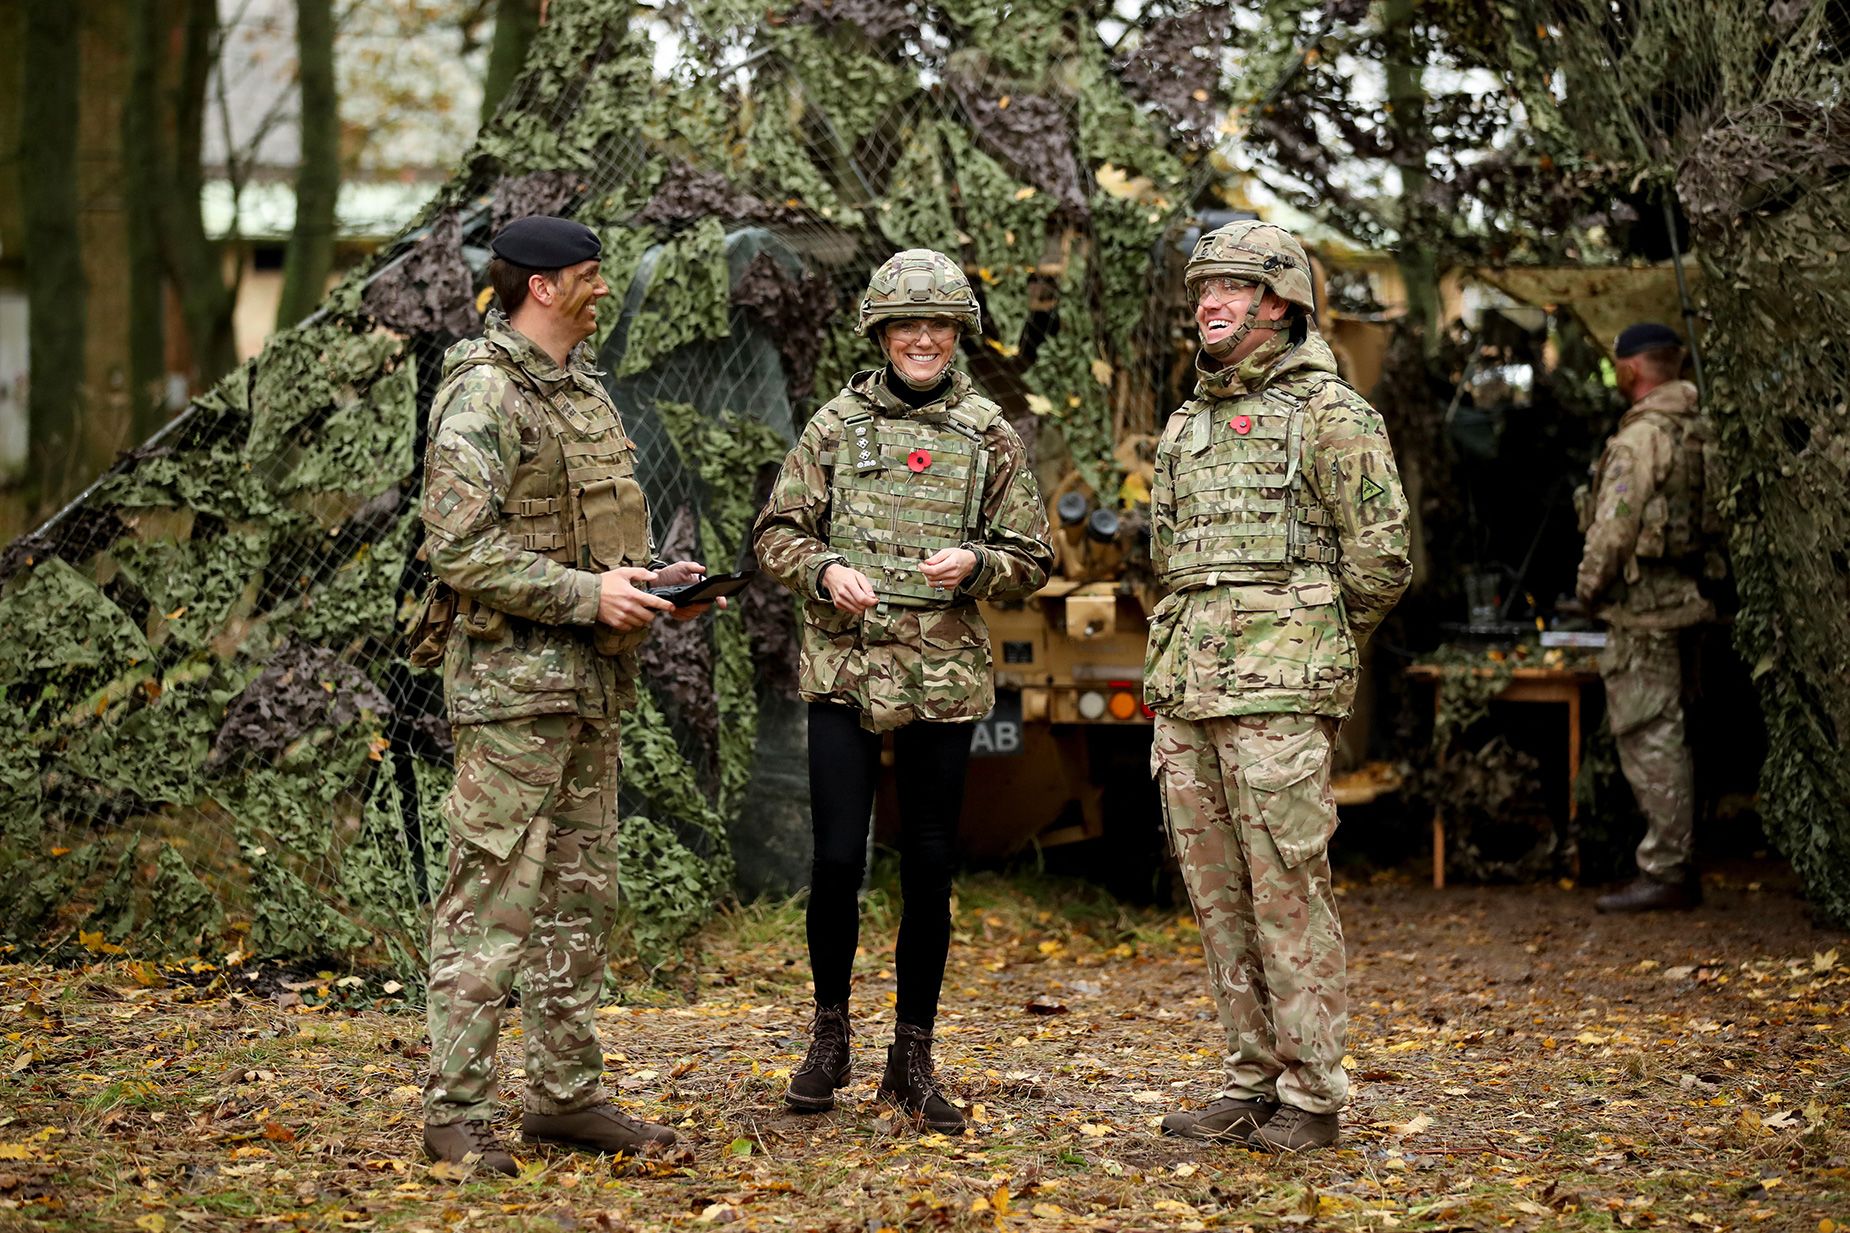 Catherine, Princess of Wales visits The Queen's Dragoon Guards Regiment for the first time as their Colonel in Chief.